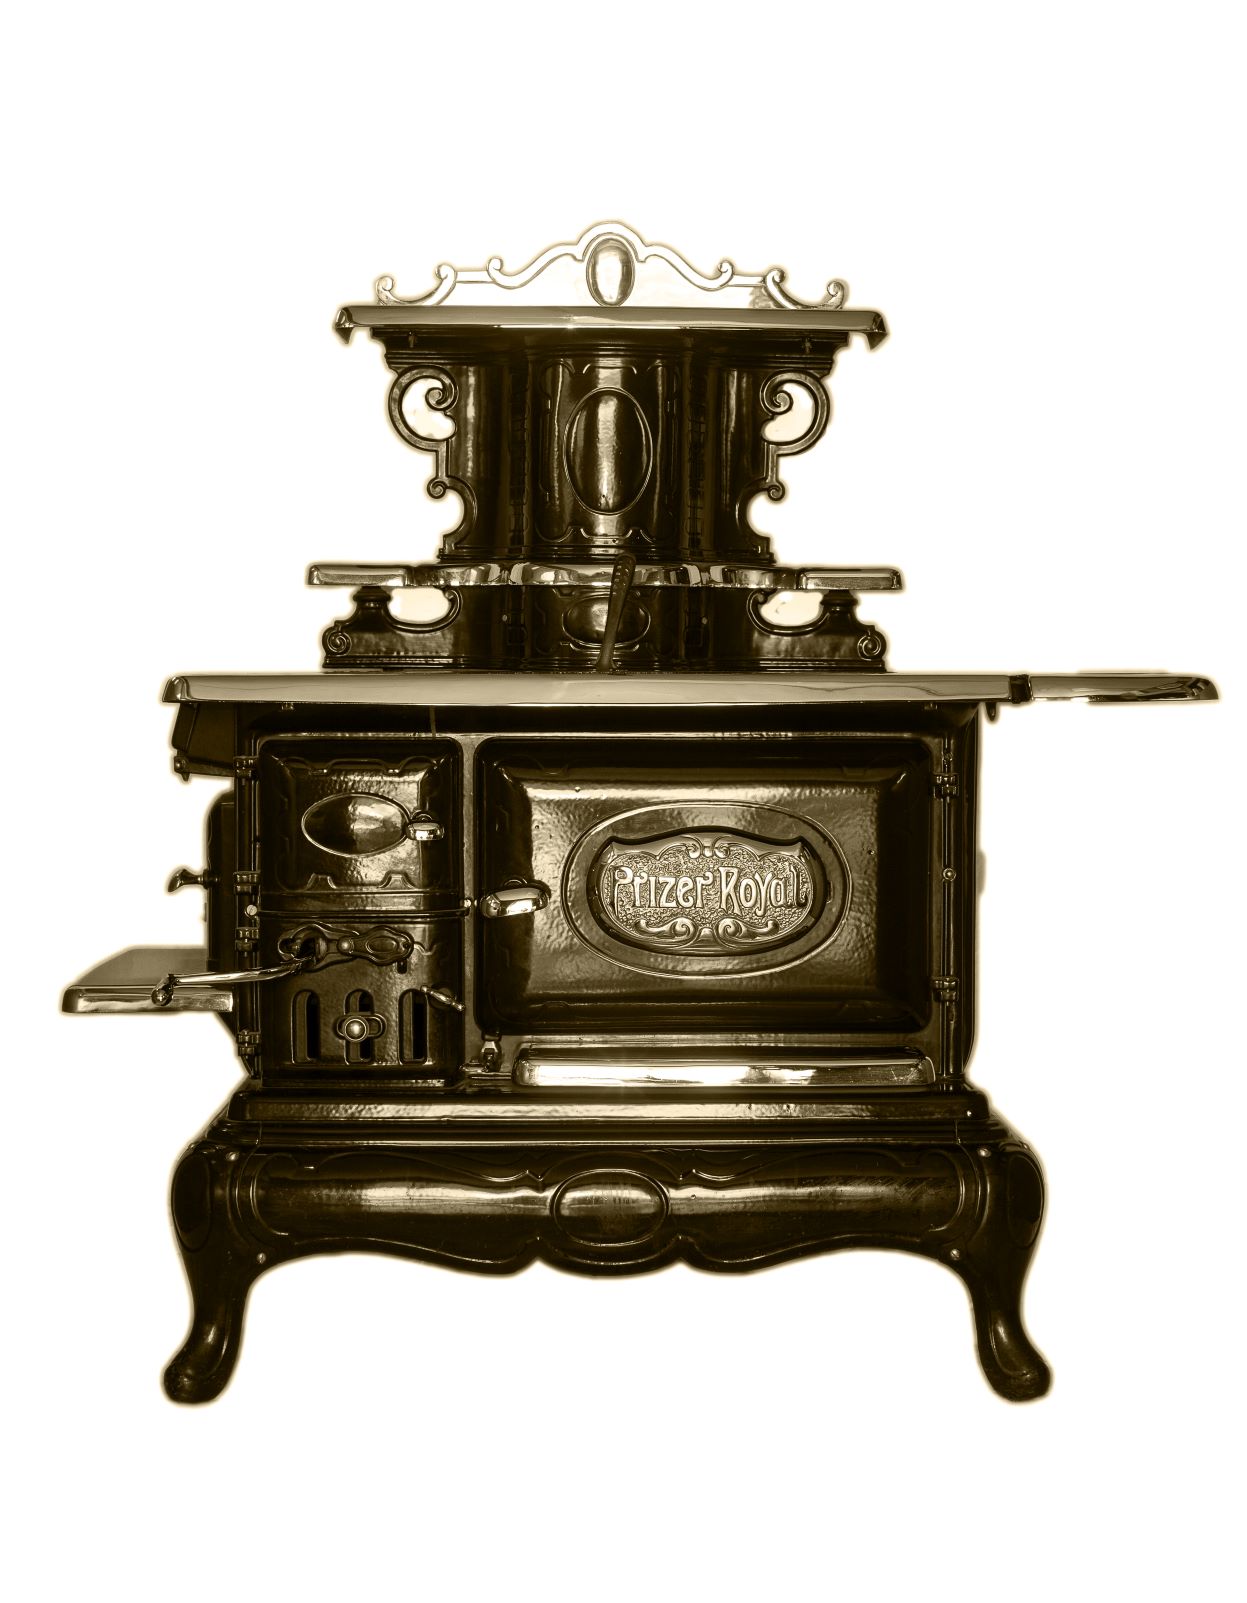 Prizer Painter Stove Works 1880s